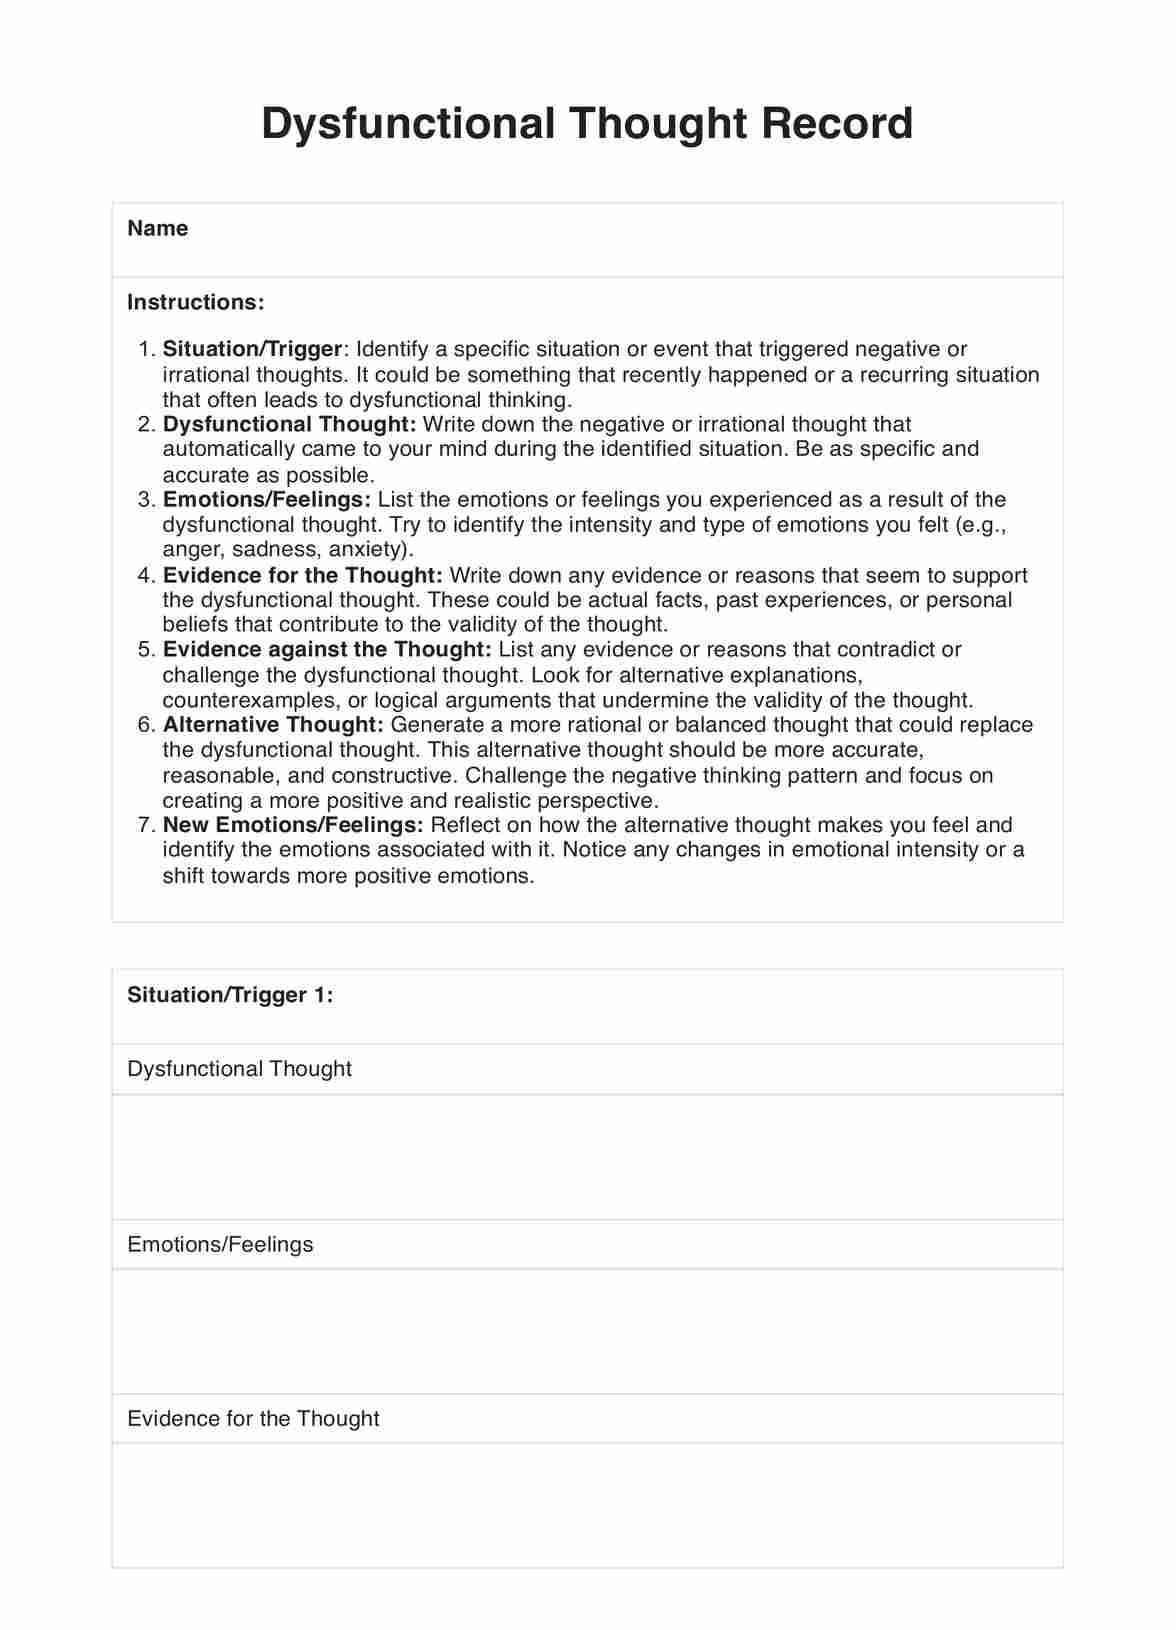 Dysfunctional Thought Record PDF Example